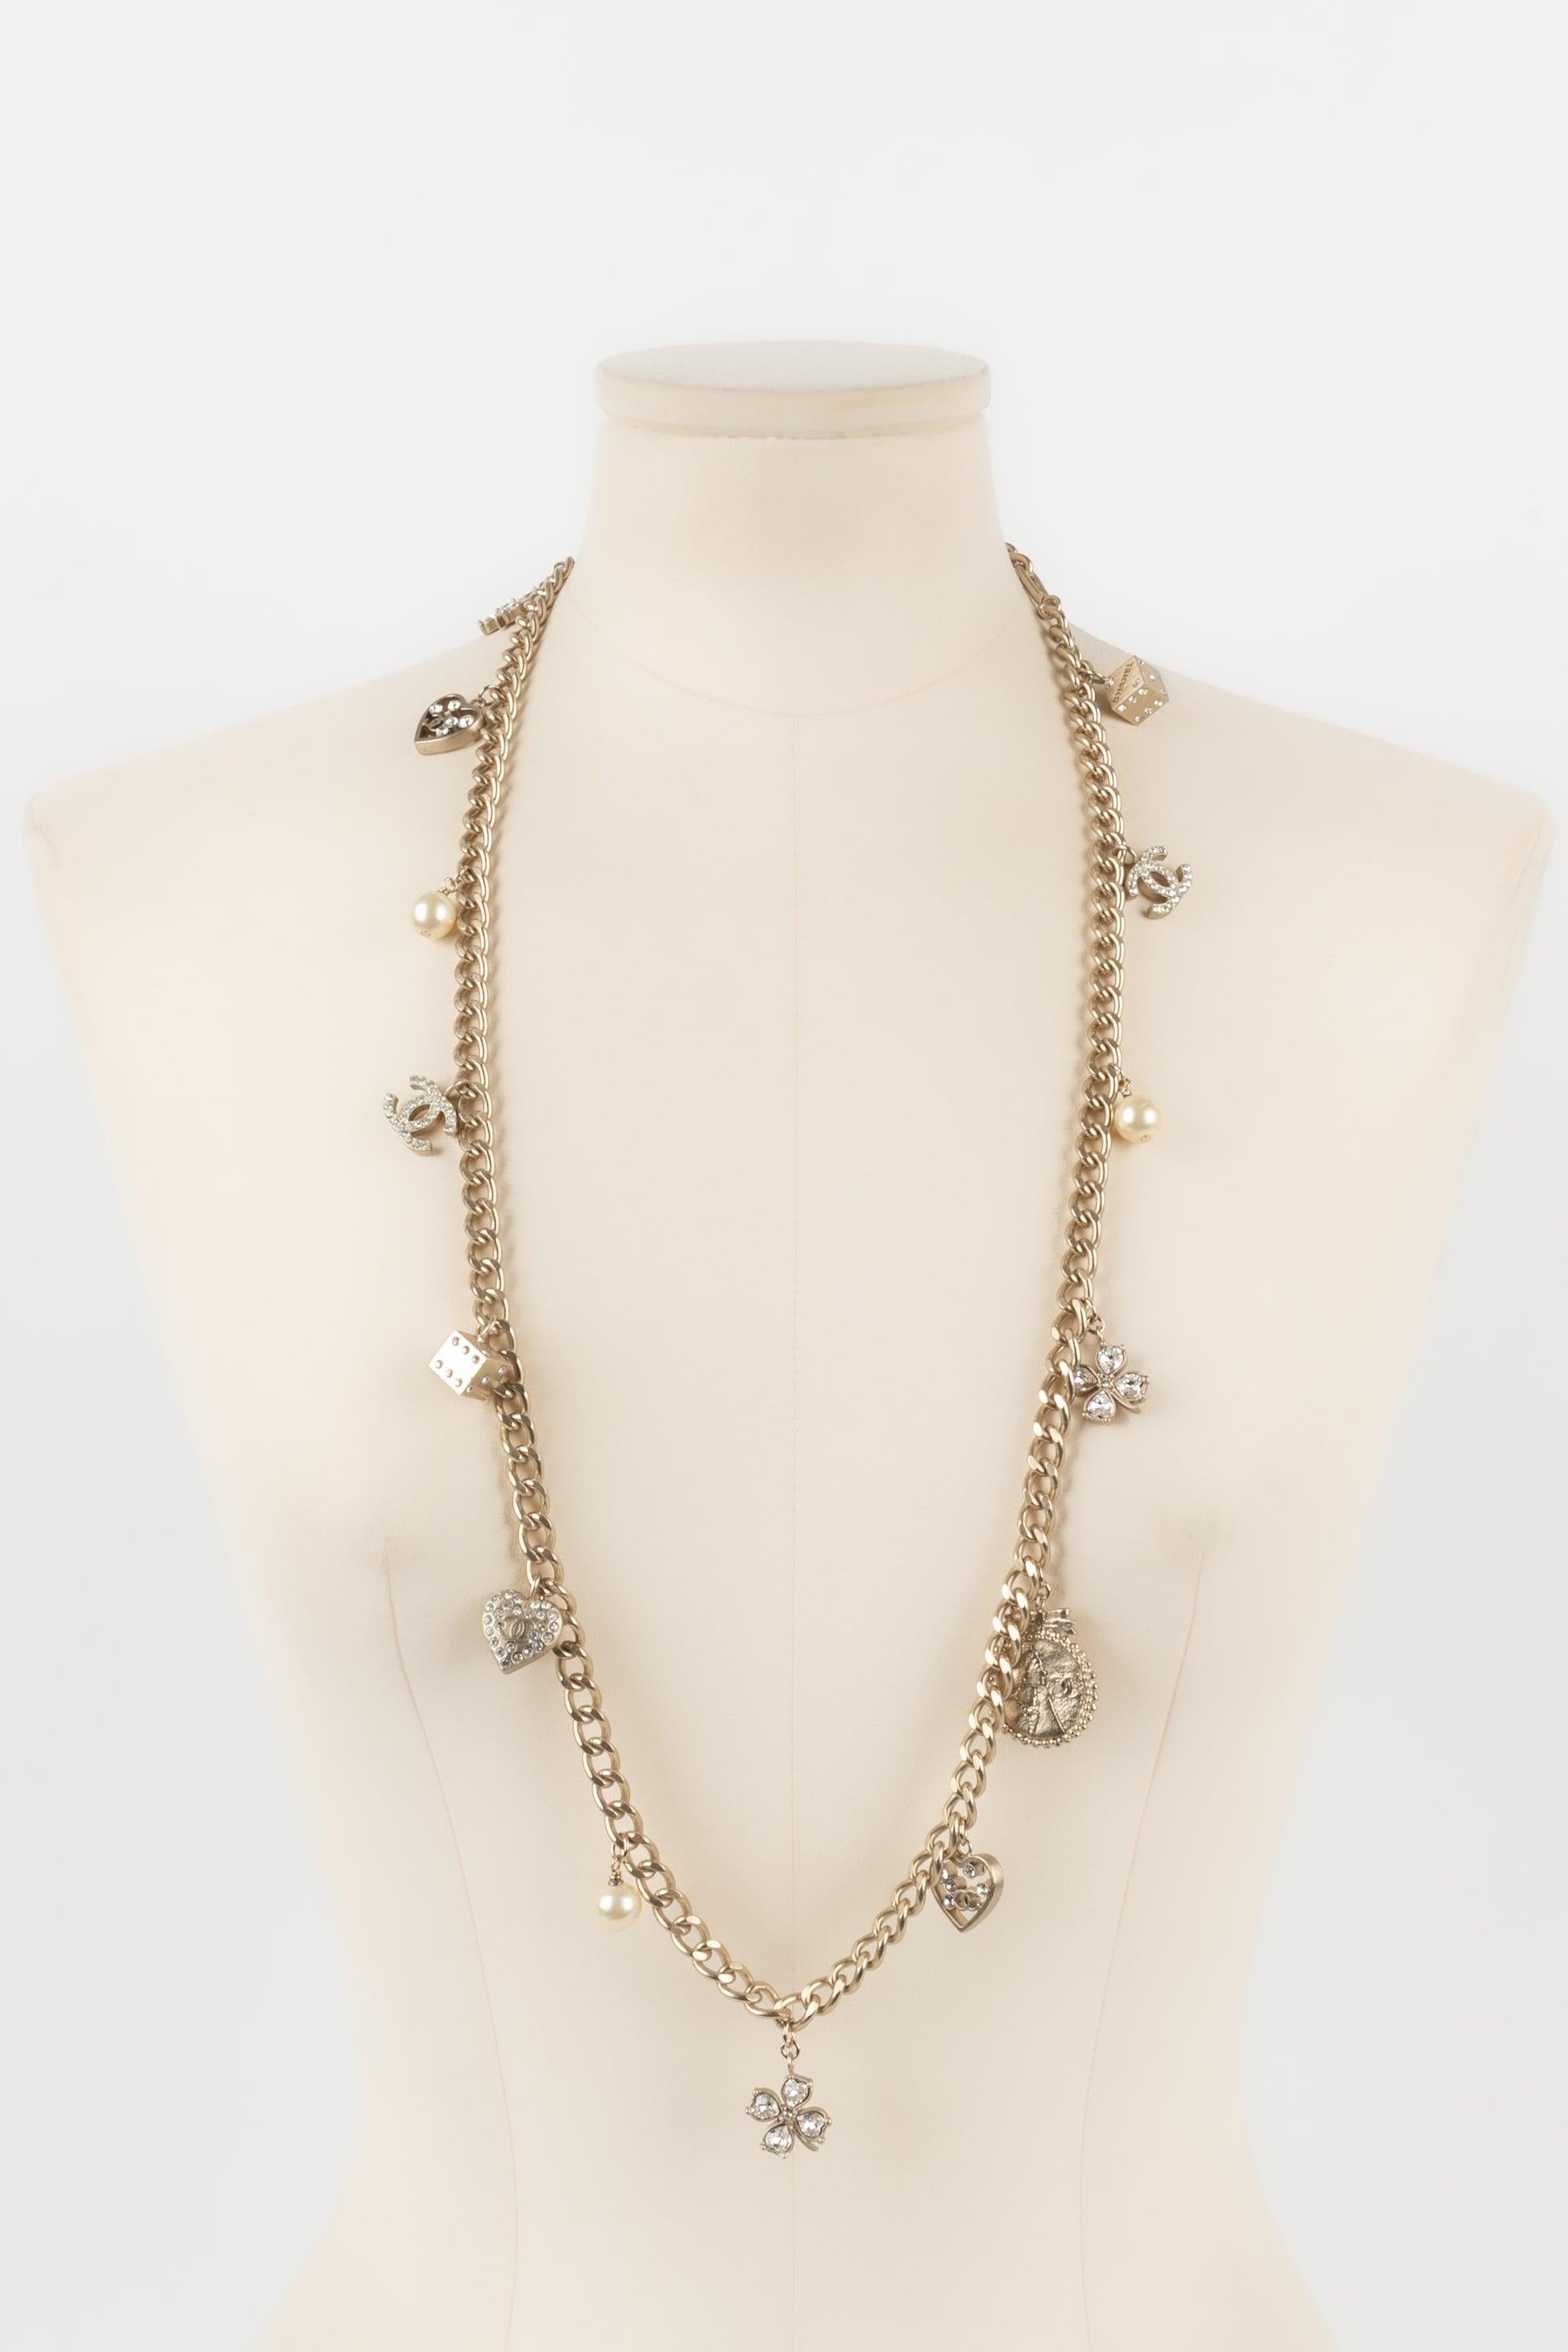 Chanel Silvery Metal Necklace Ornamented with Charms and Rhinestones, Fall 2005 In Excellent Condition For Sale In SAINT-OUEN-SUR-SEINE, FR